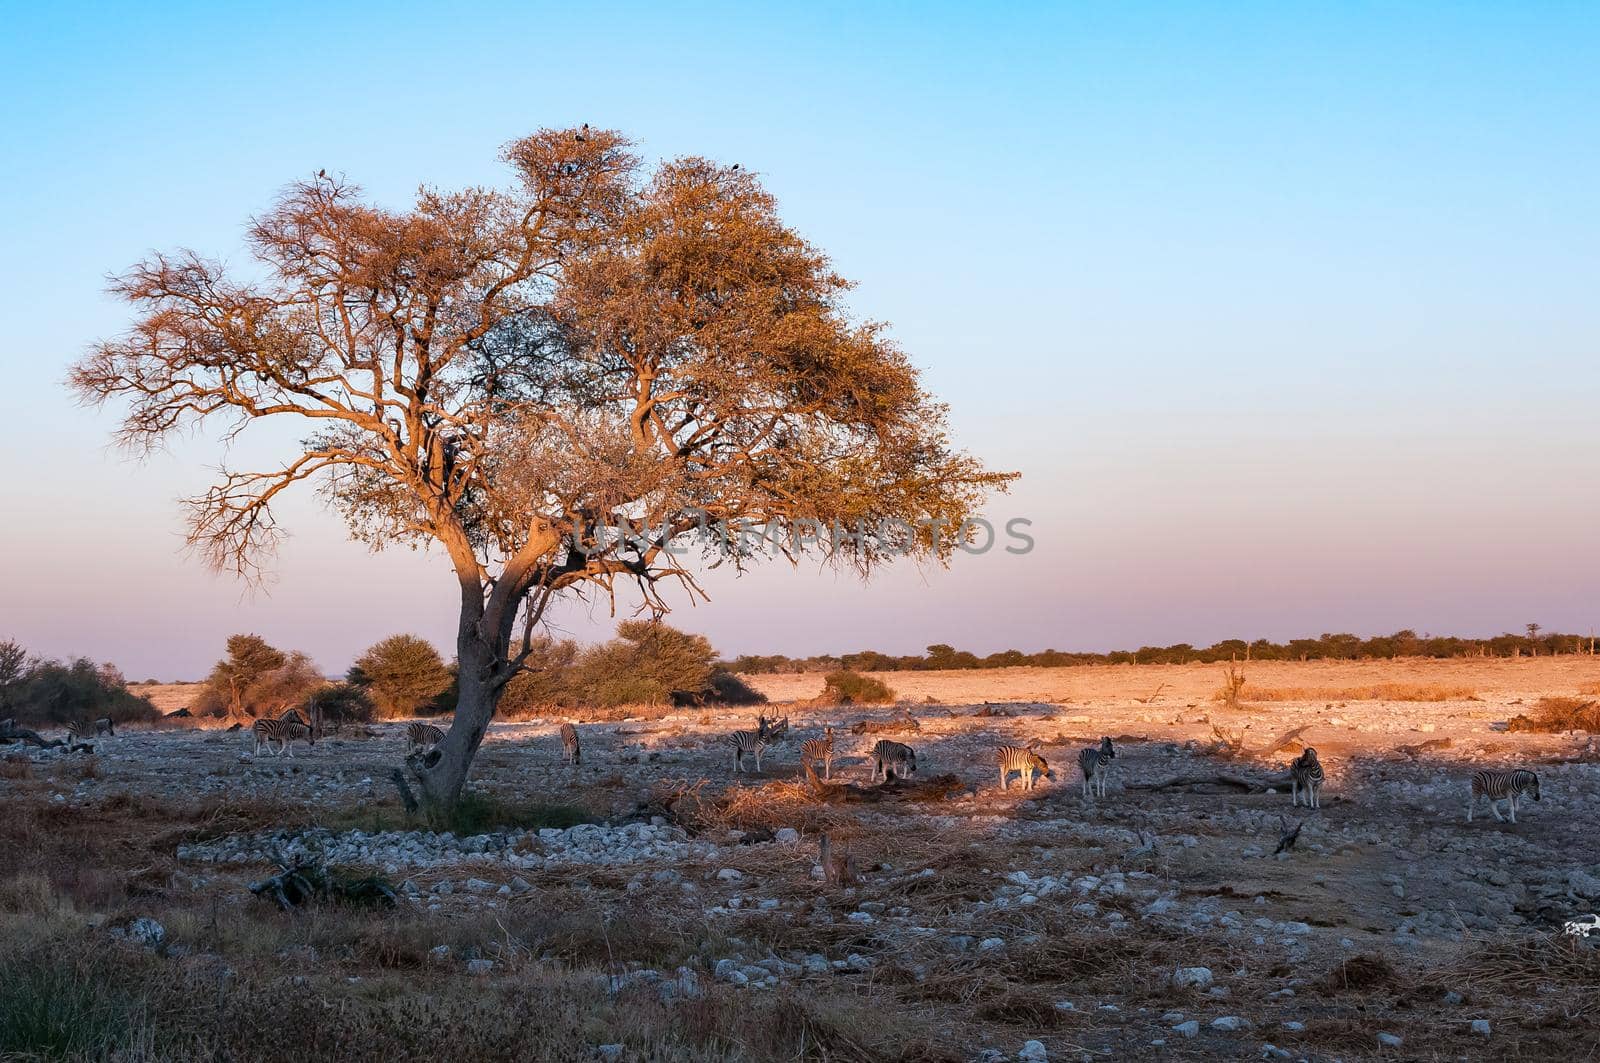 Burchells zebras walking past a large tree at sunrise in northern Namibia